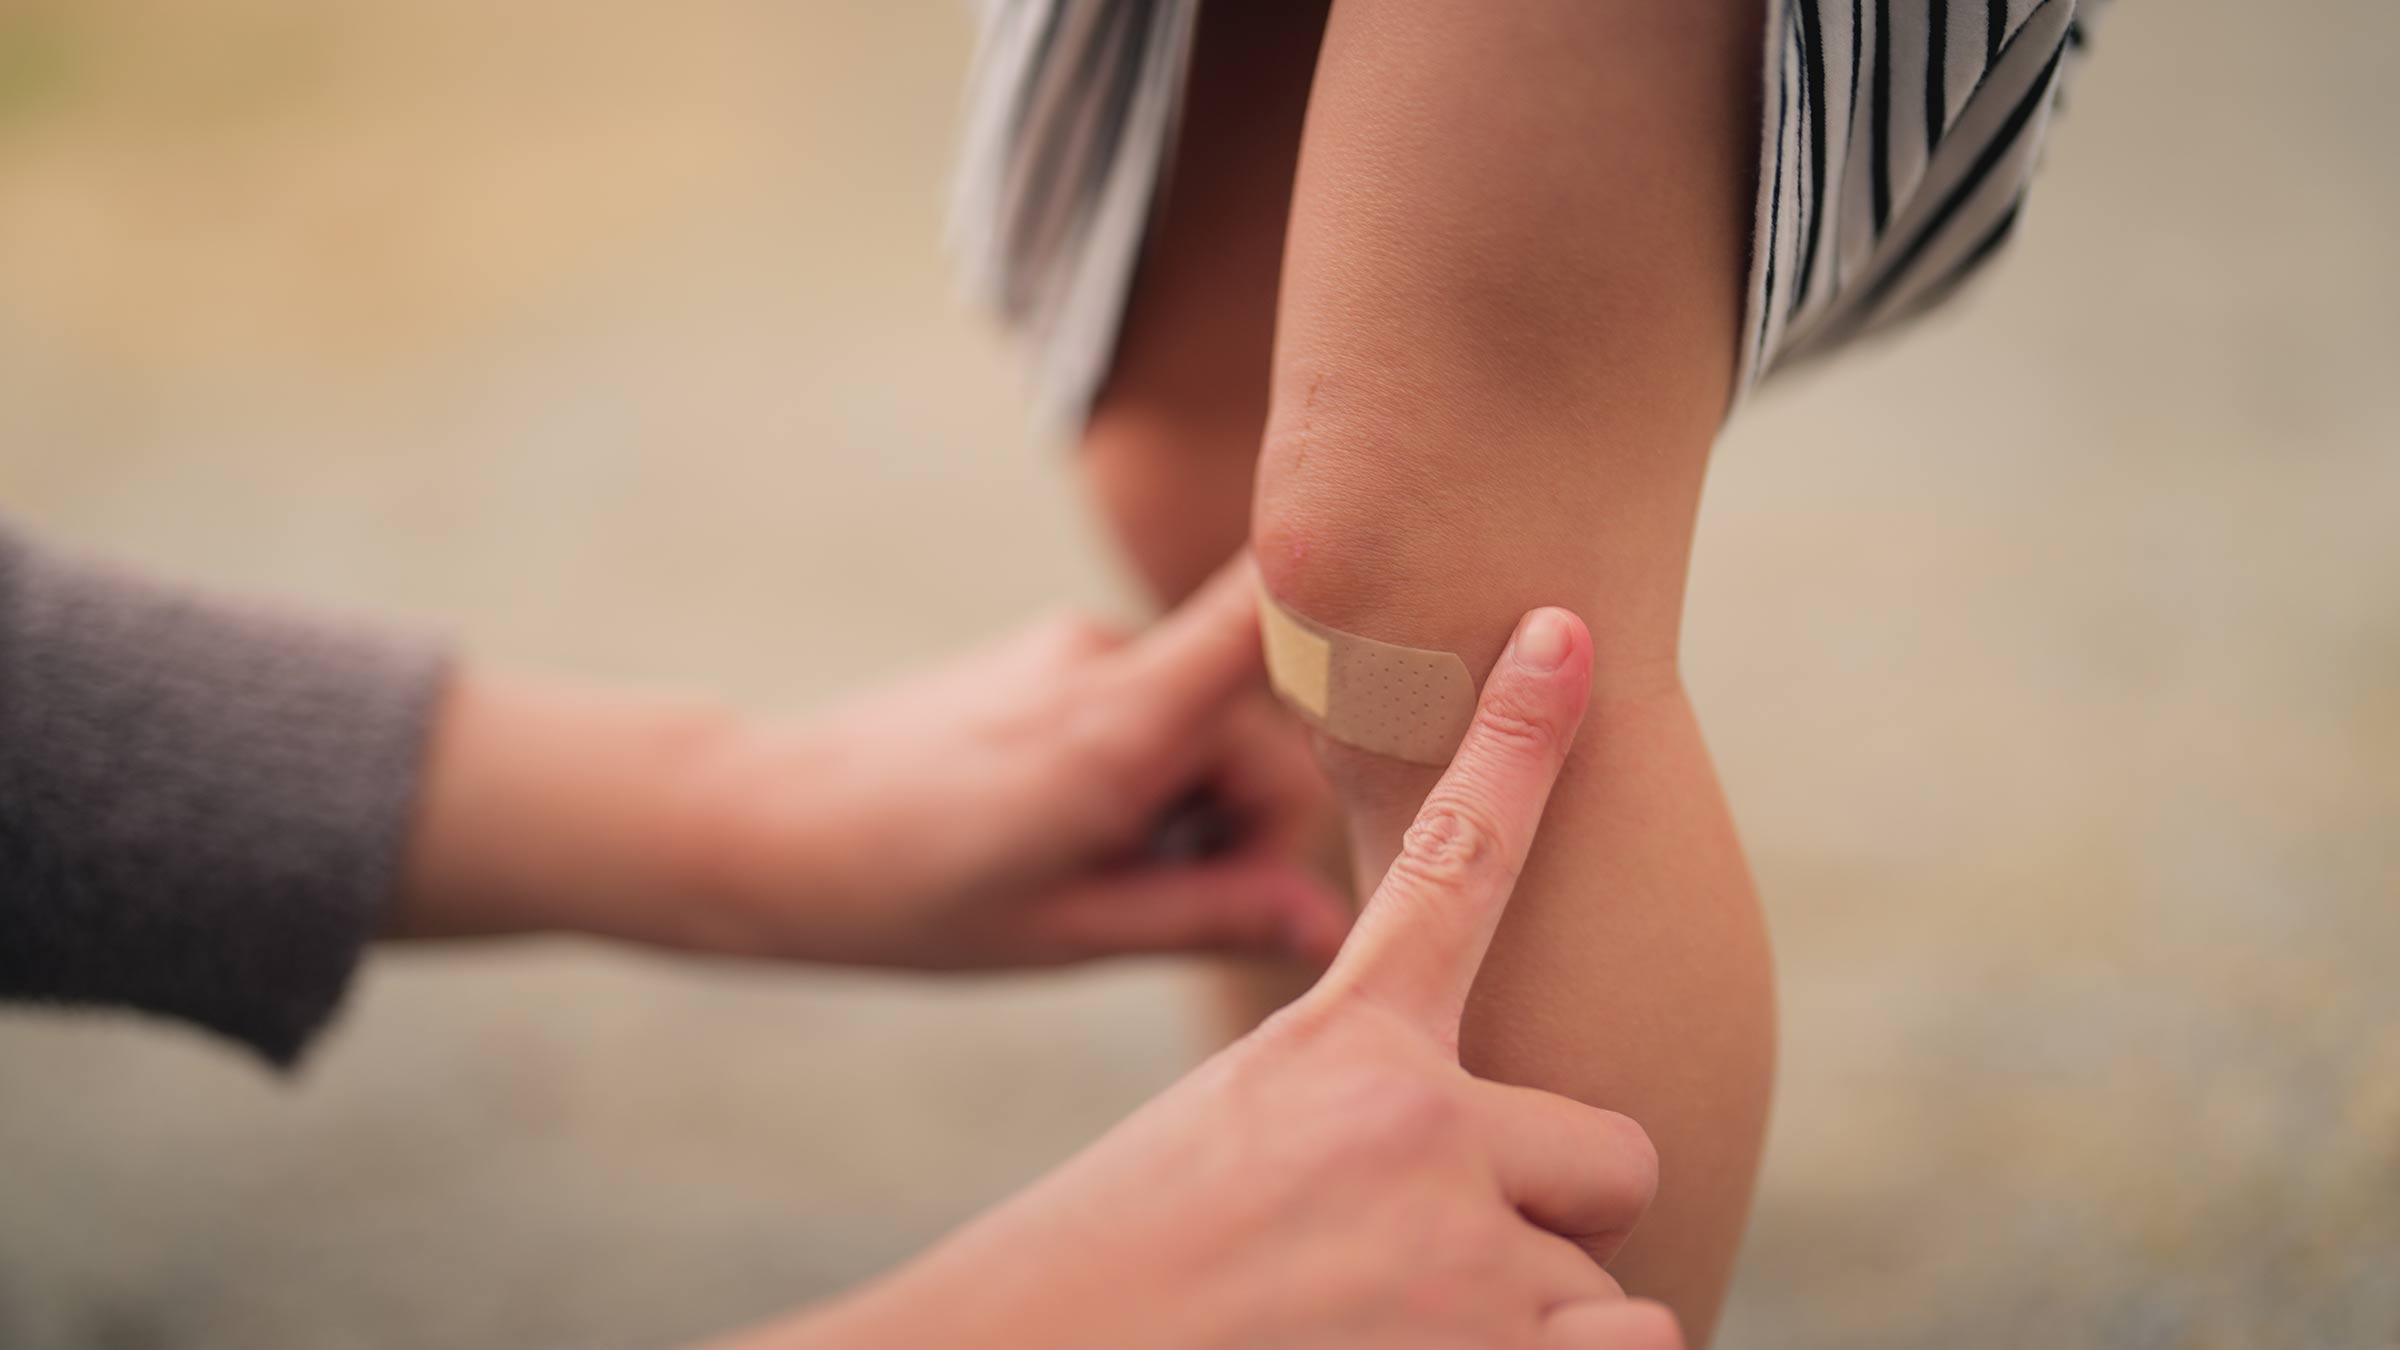 A mom puts a bandage on her child’s knee